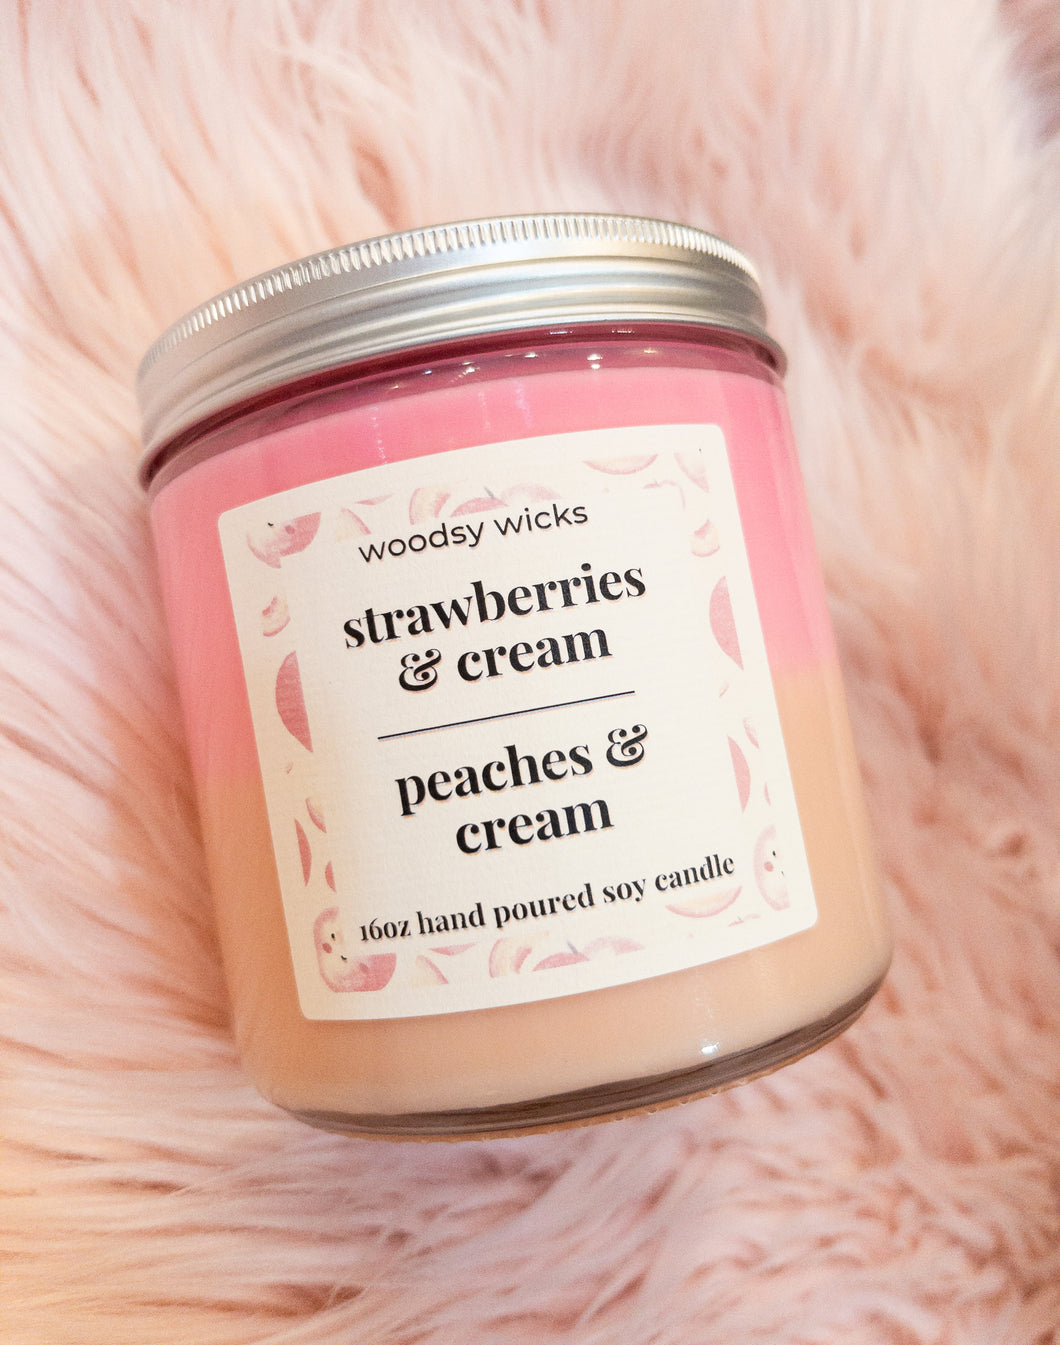 Strawberries & cream + Peaches & cream Candle - 16oz Cotton Wick - Soy Wax Candle